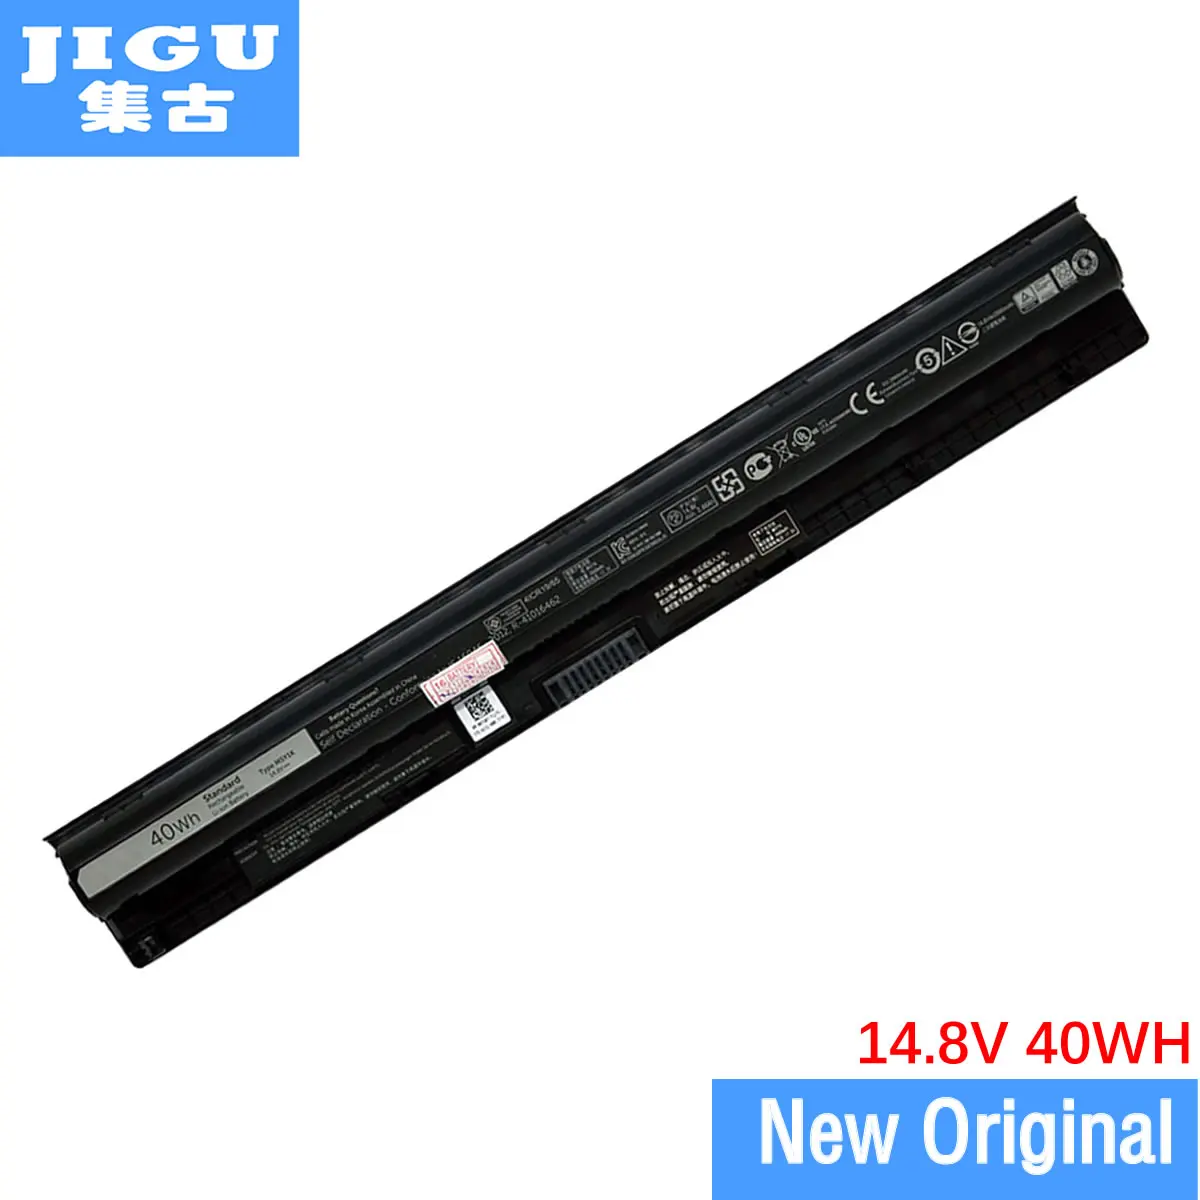 

New M5Y1K Laptop Battery for Dell Inspiron 15 3000 5000 5555 5558 5559 3552 3558 3567 14 3452 3458 5458 17 5755 5758 5759 Series